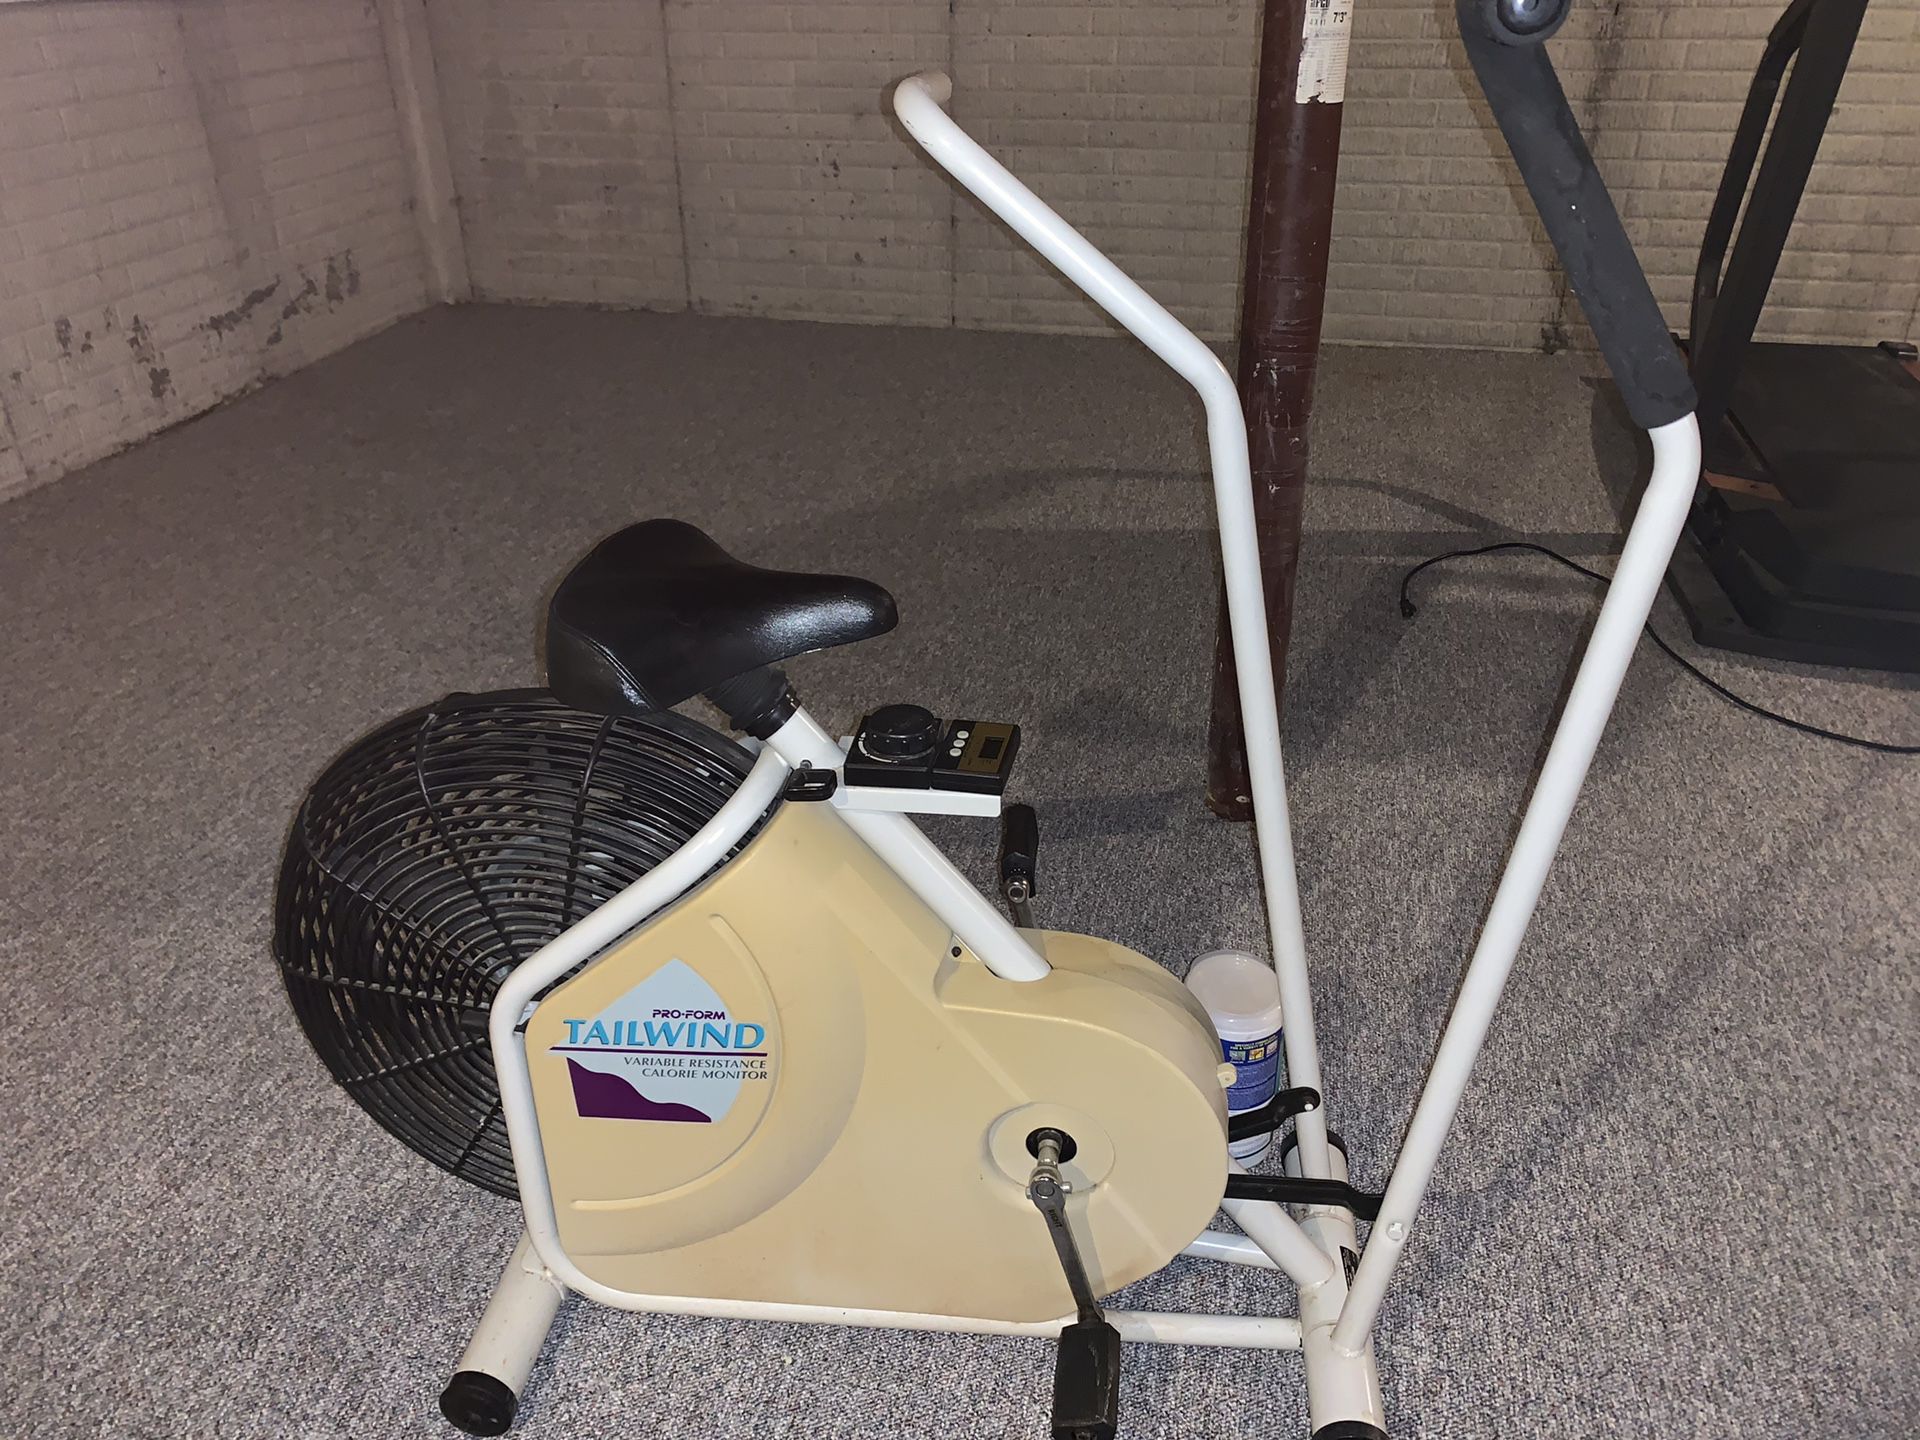 Tail wind exercise bike